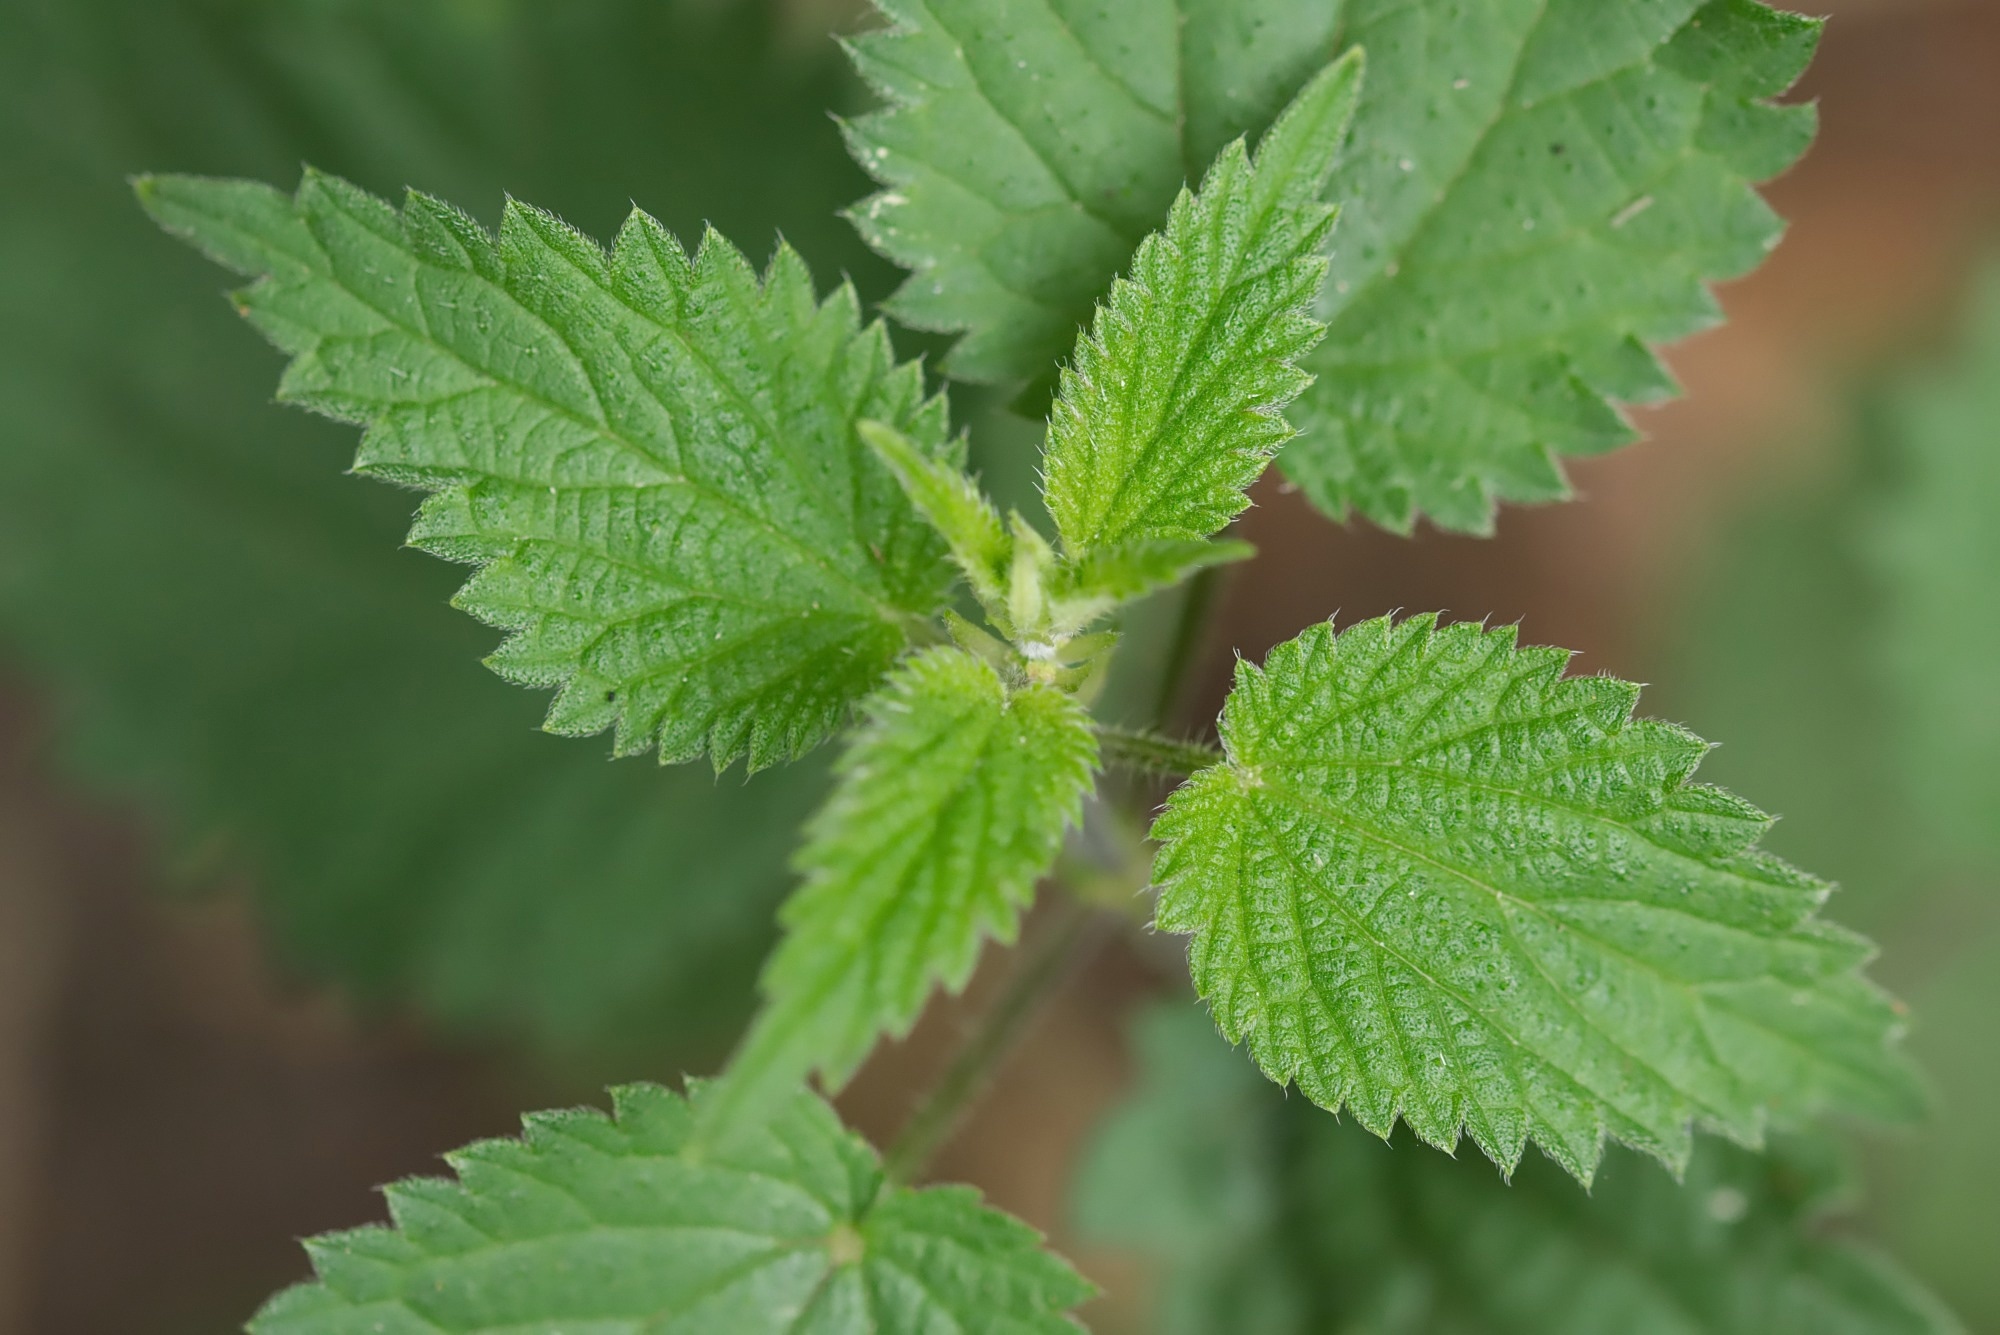 Study: Carbohydrate-Binding Protein from Stinging Nettle as Fusion Inhibitor for SARS-CoV-2 Variants of Concern. Image Credit: Craig Walton / Shutterstock